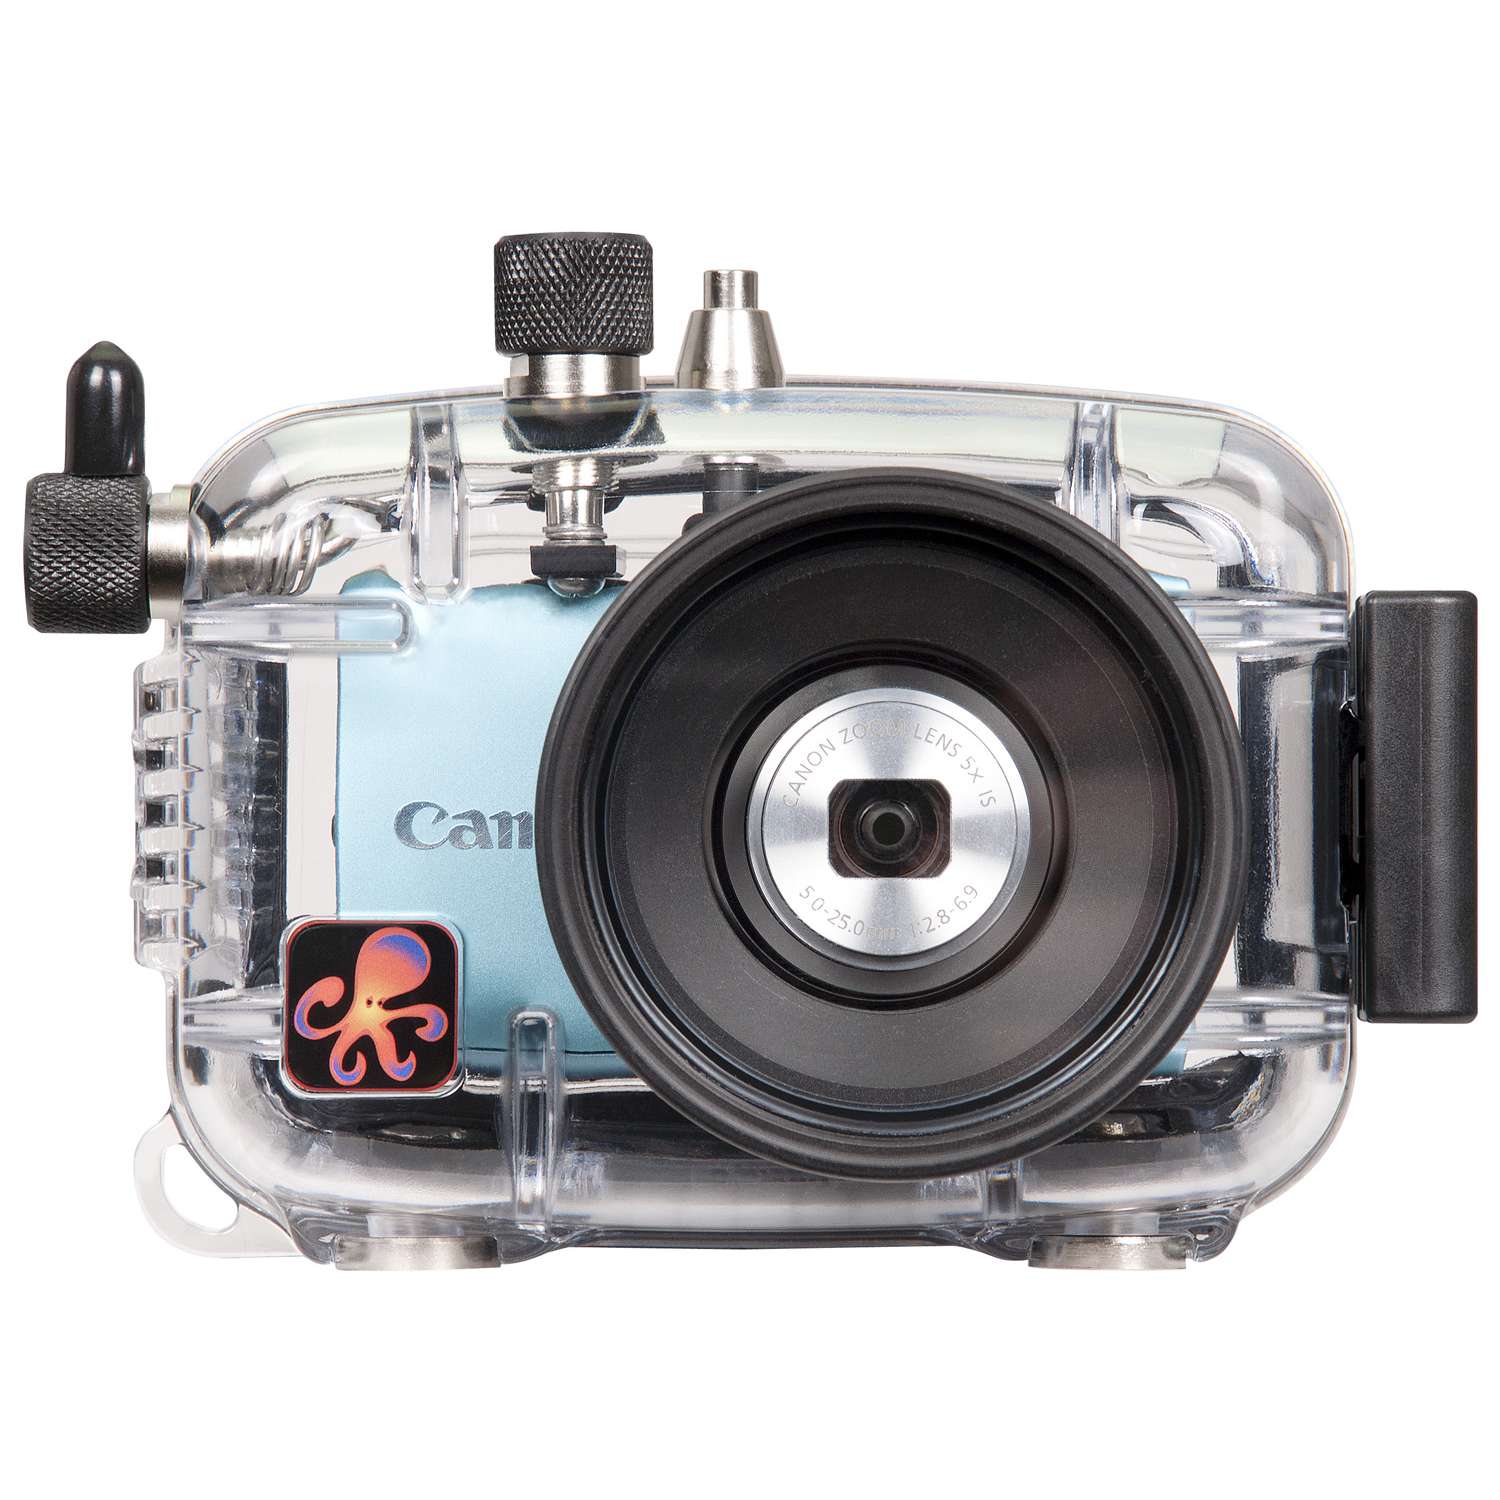 Underwater Housing for Canon PowerShot A2300, PowerShot A2400 IS